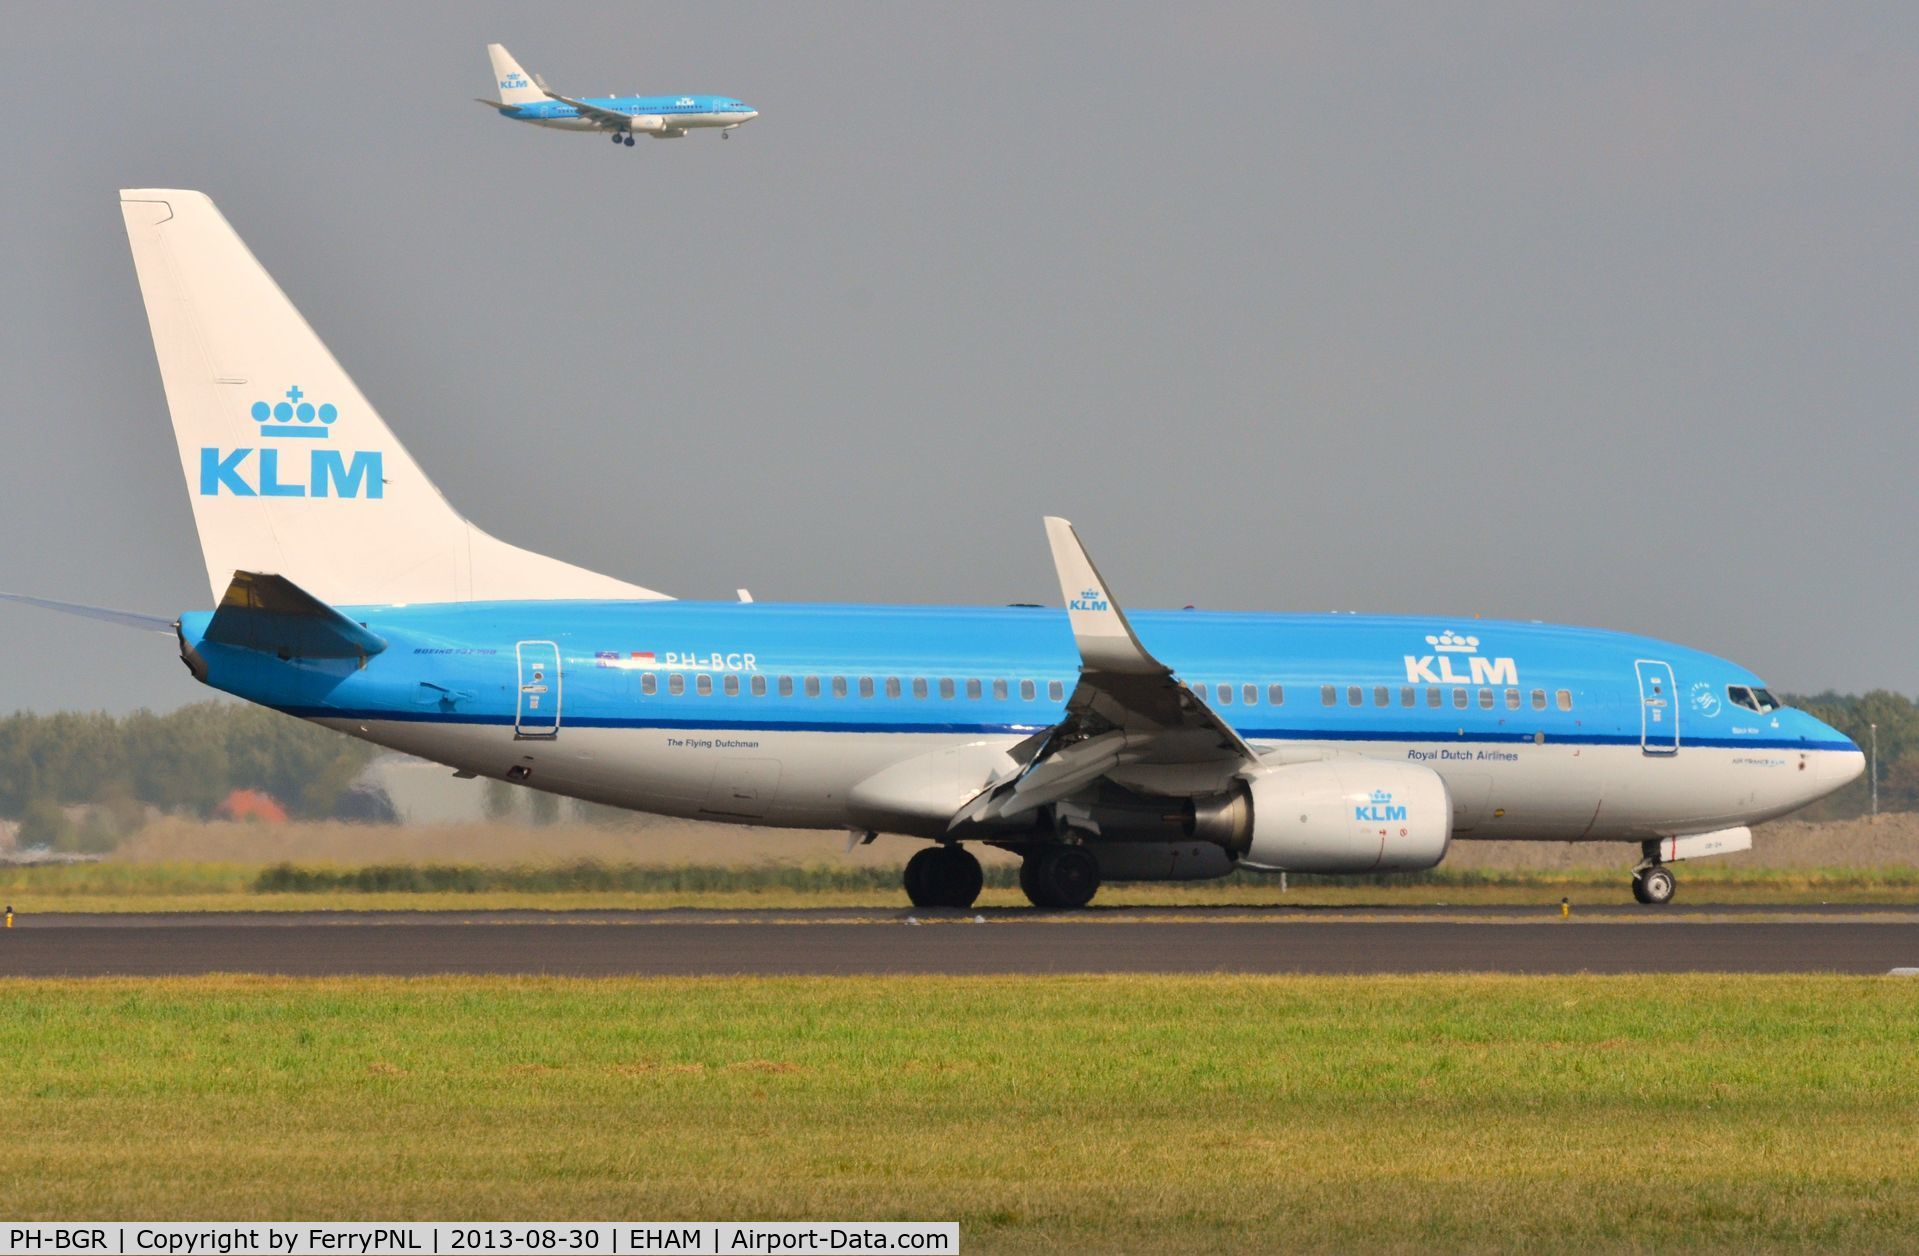 PH-BGR, 2011 Boeing 737-7K2 C/N 39446, KLM B737 just arrived while her sister ship is about to.